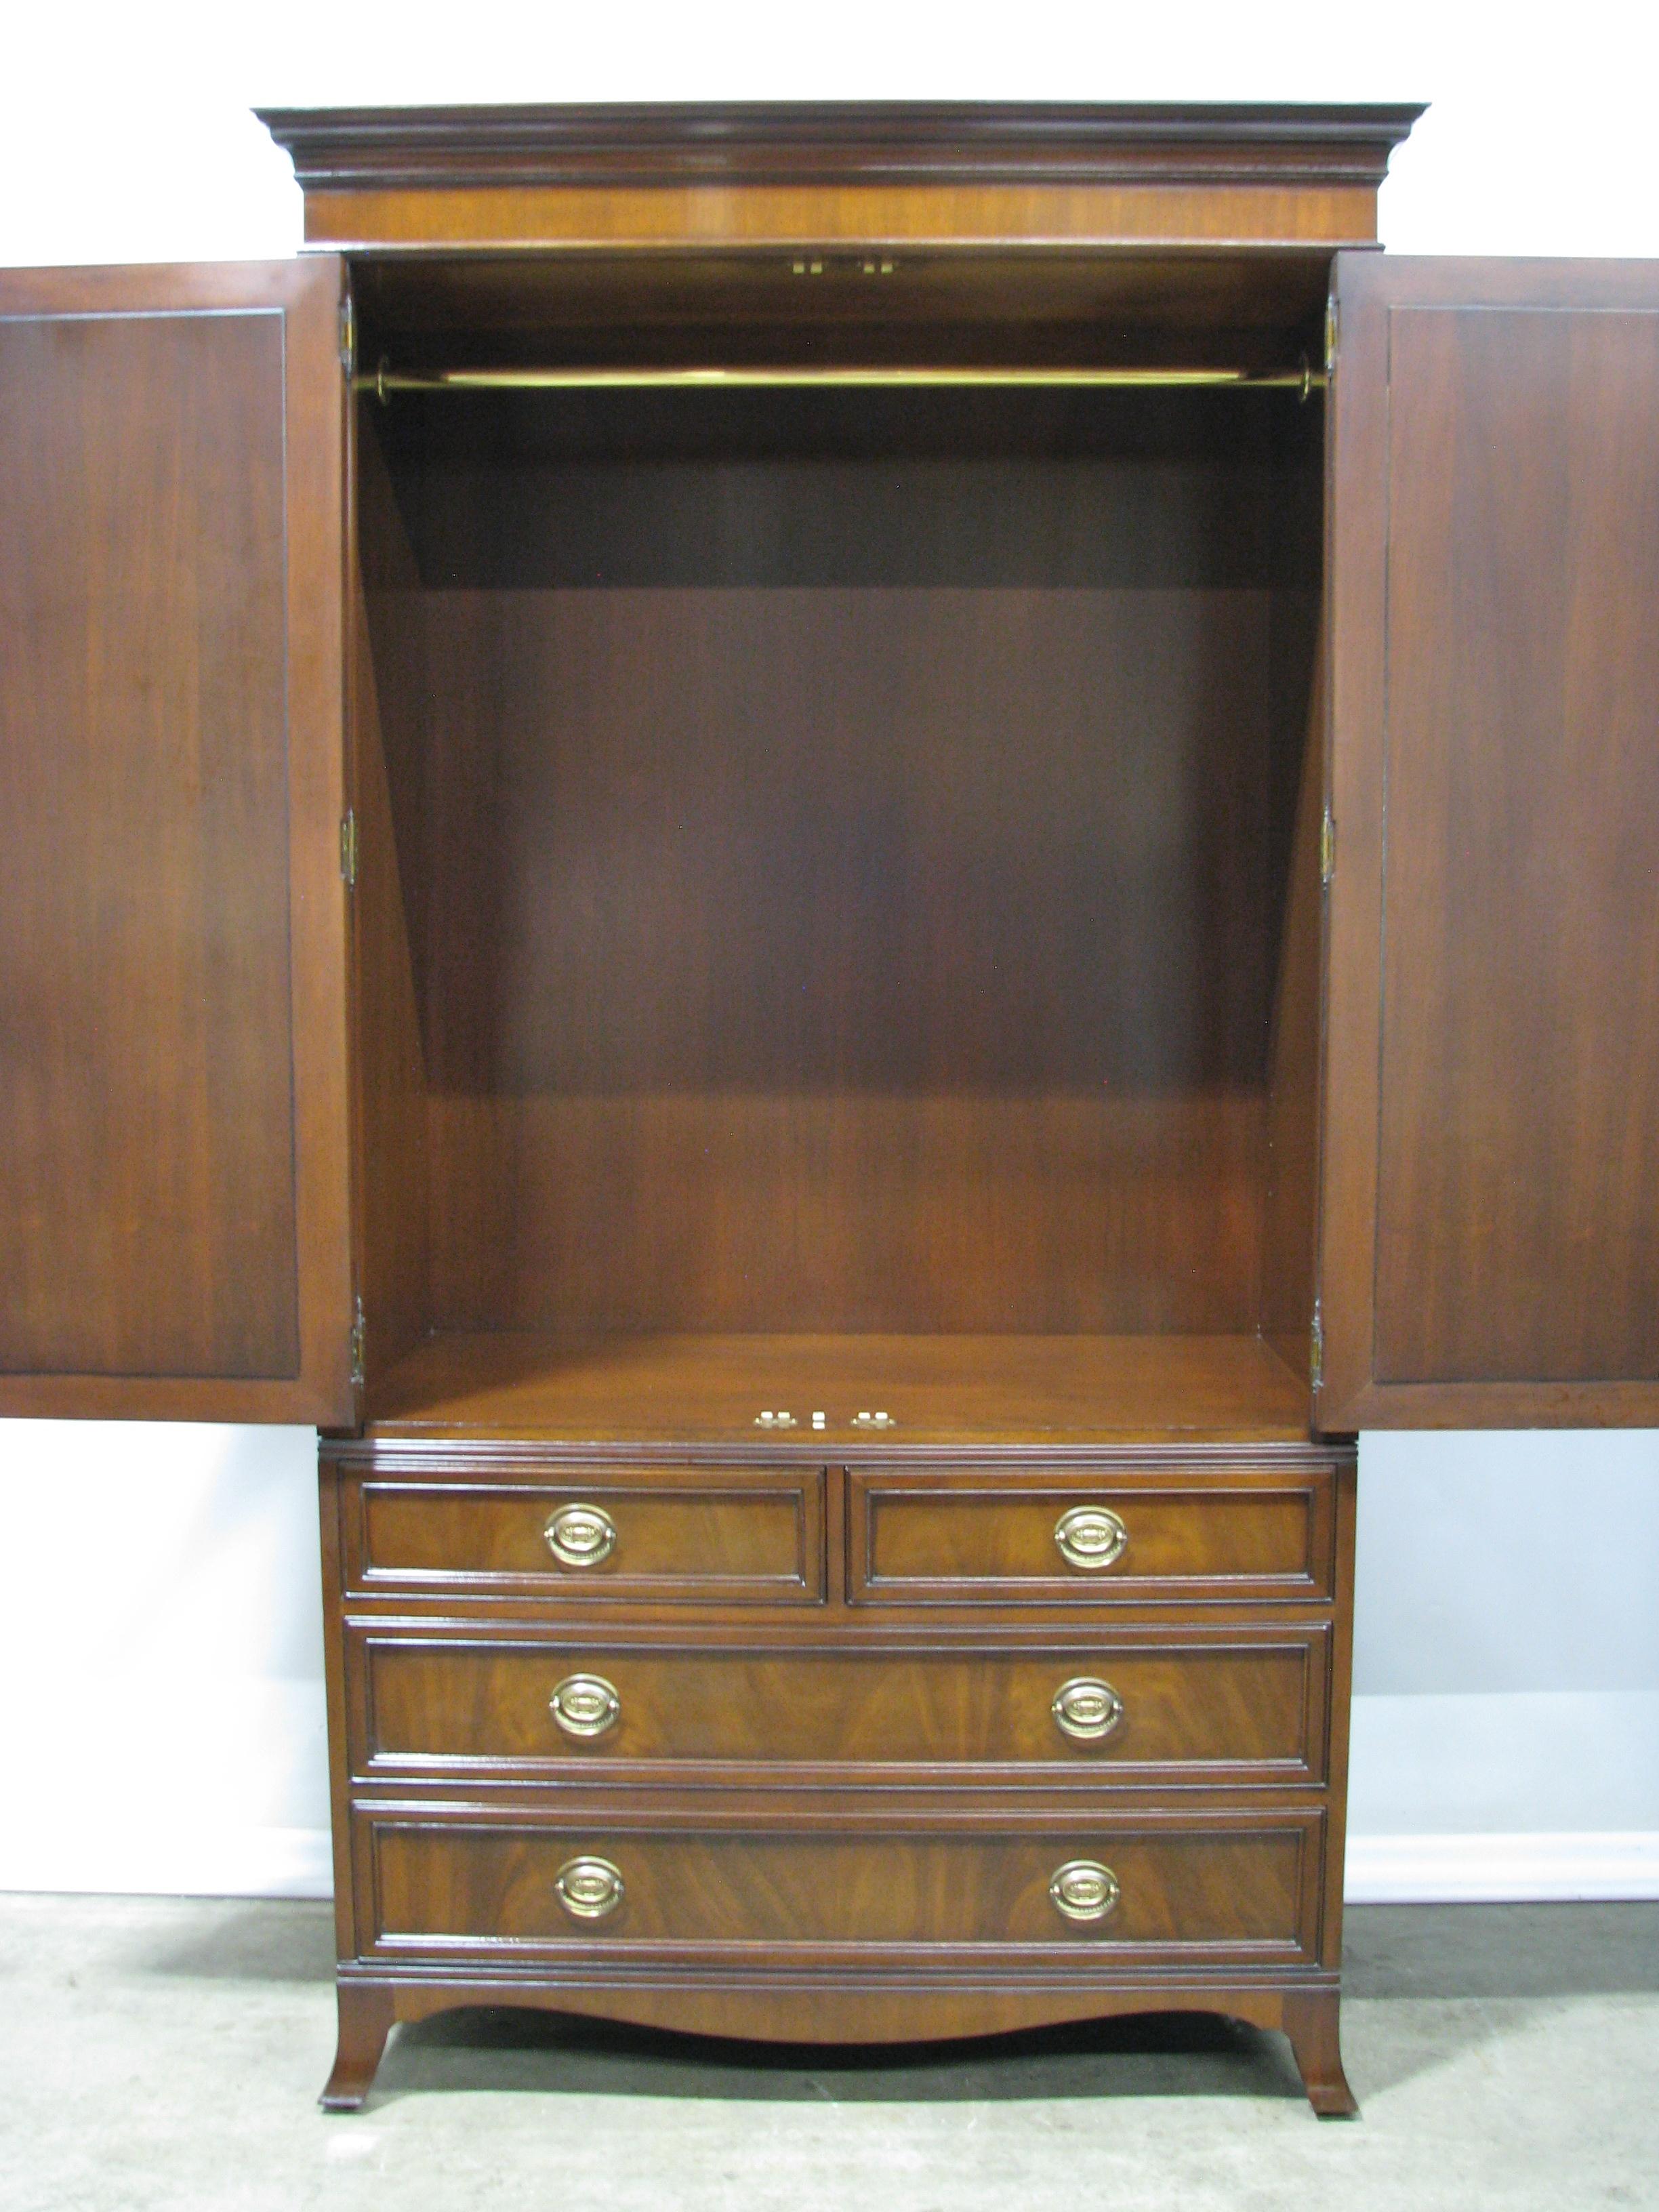 18th century style American armoire by luxury furniture brand Karges. Constructed of Mahogany solids with beautifully figured mahogany veneers. Tall upper cabinet, with locking doors featuring an oval inlay. The interior is fitted with a brass rod